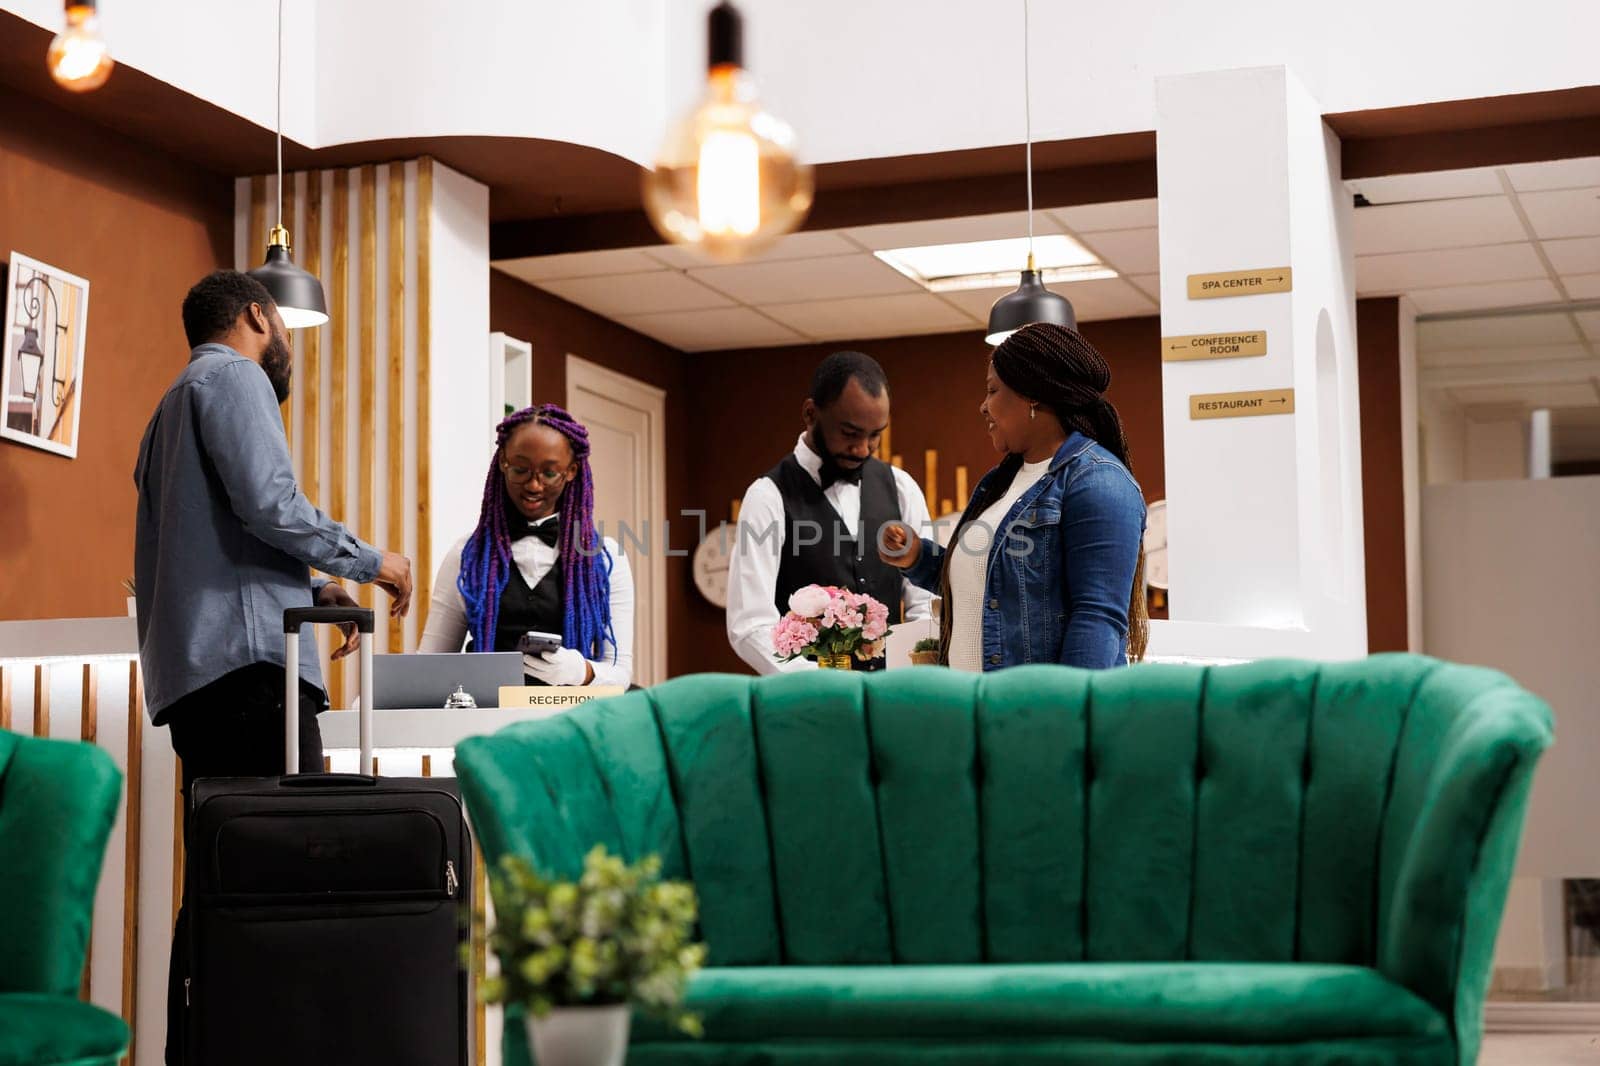 Happy young African American couple checking in at resort, arriving to hotel, traveling together. Friendly front desk staff assisting tourists with check-in process, registering guests